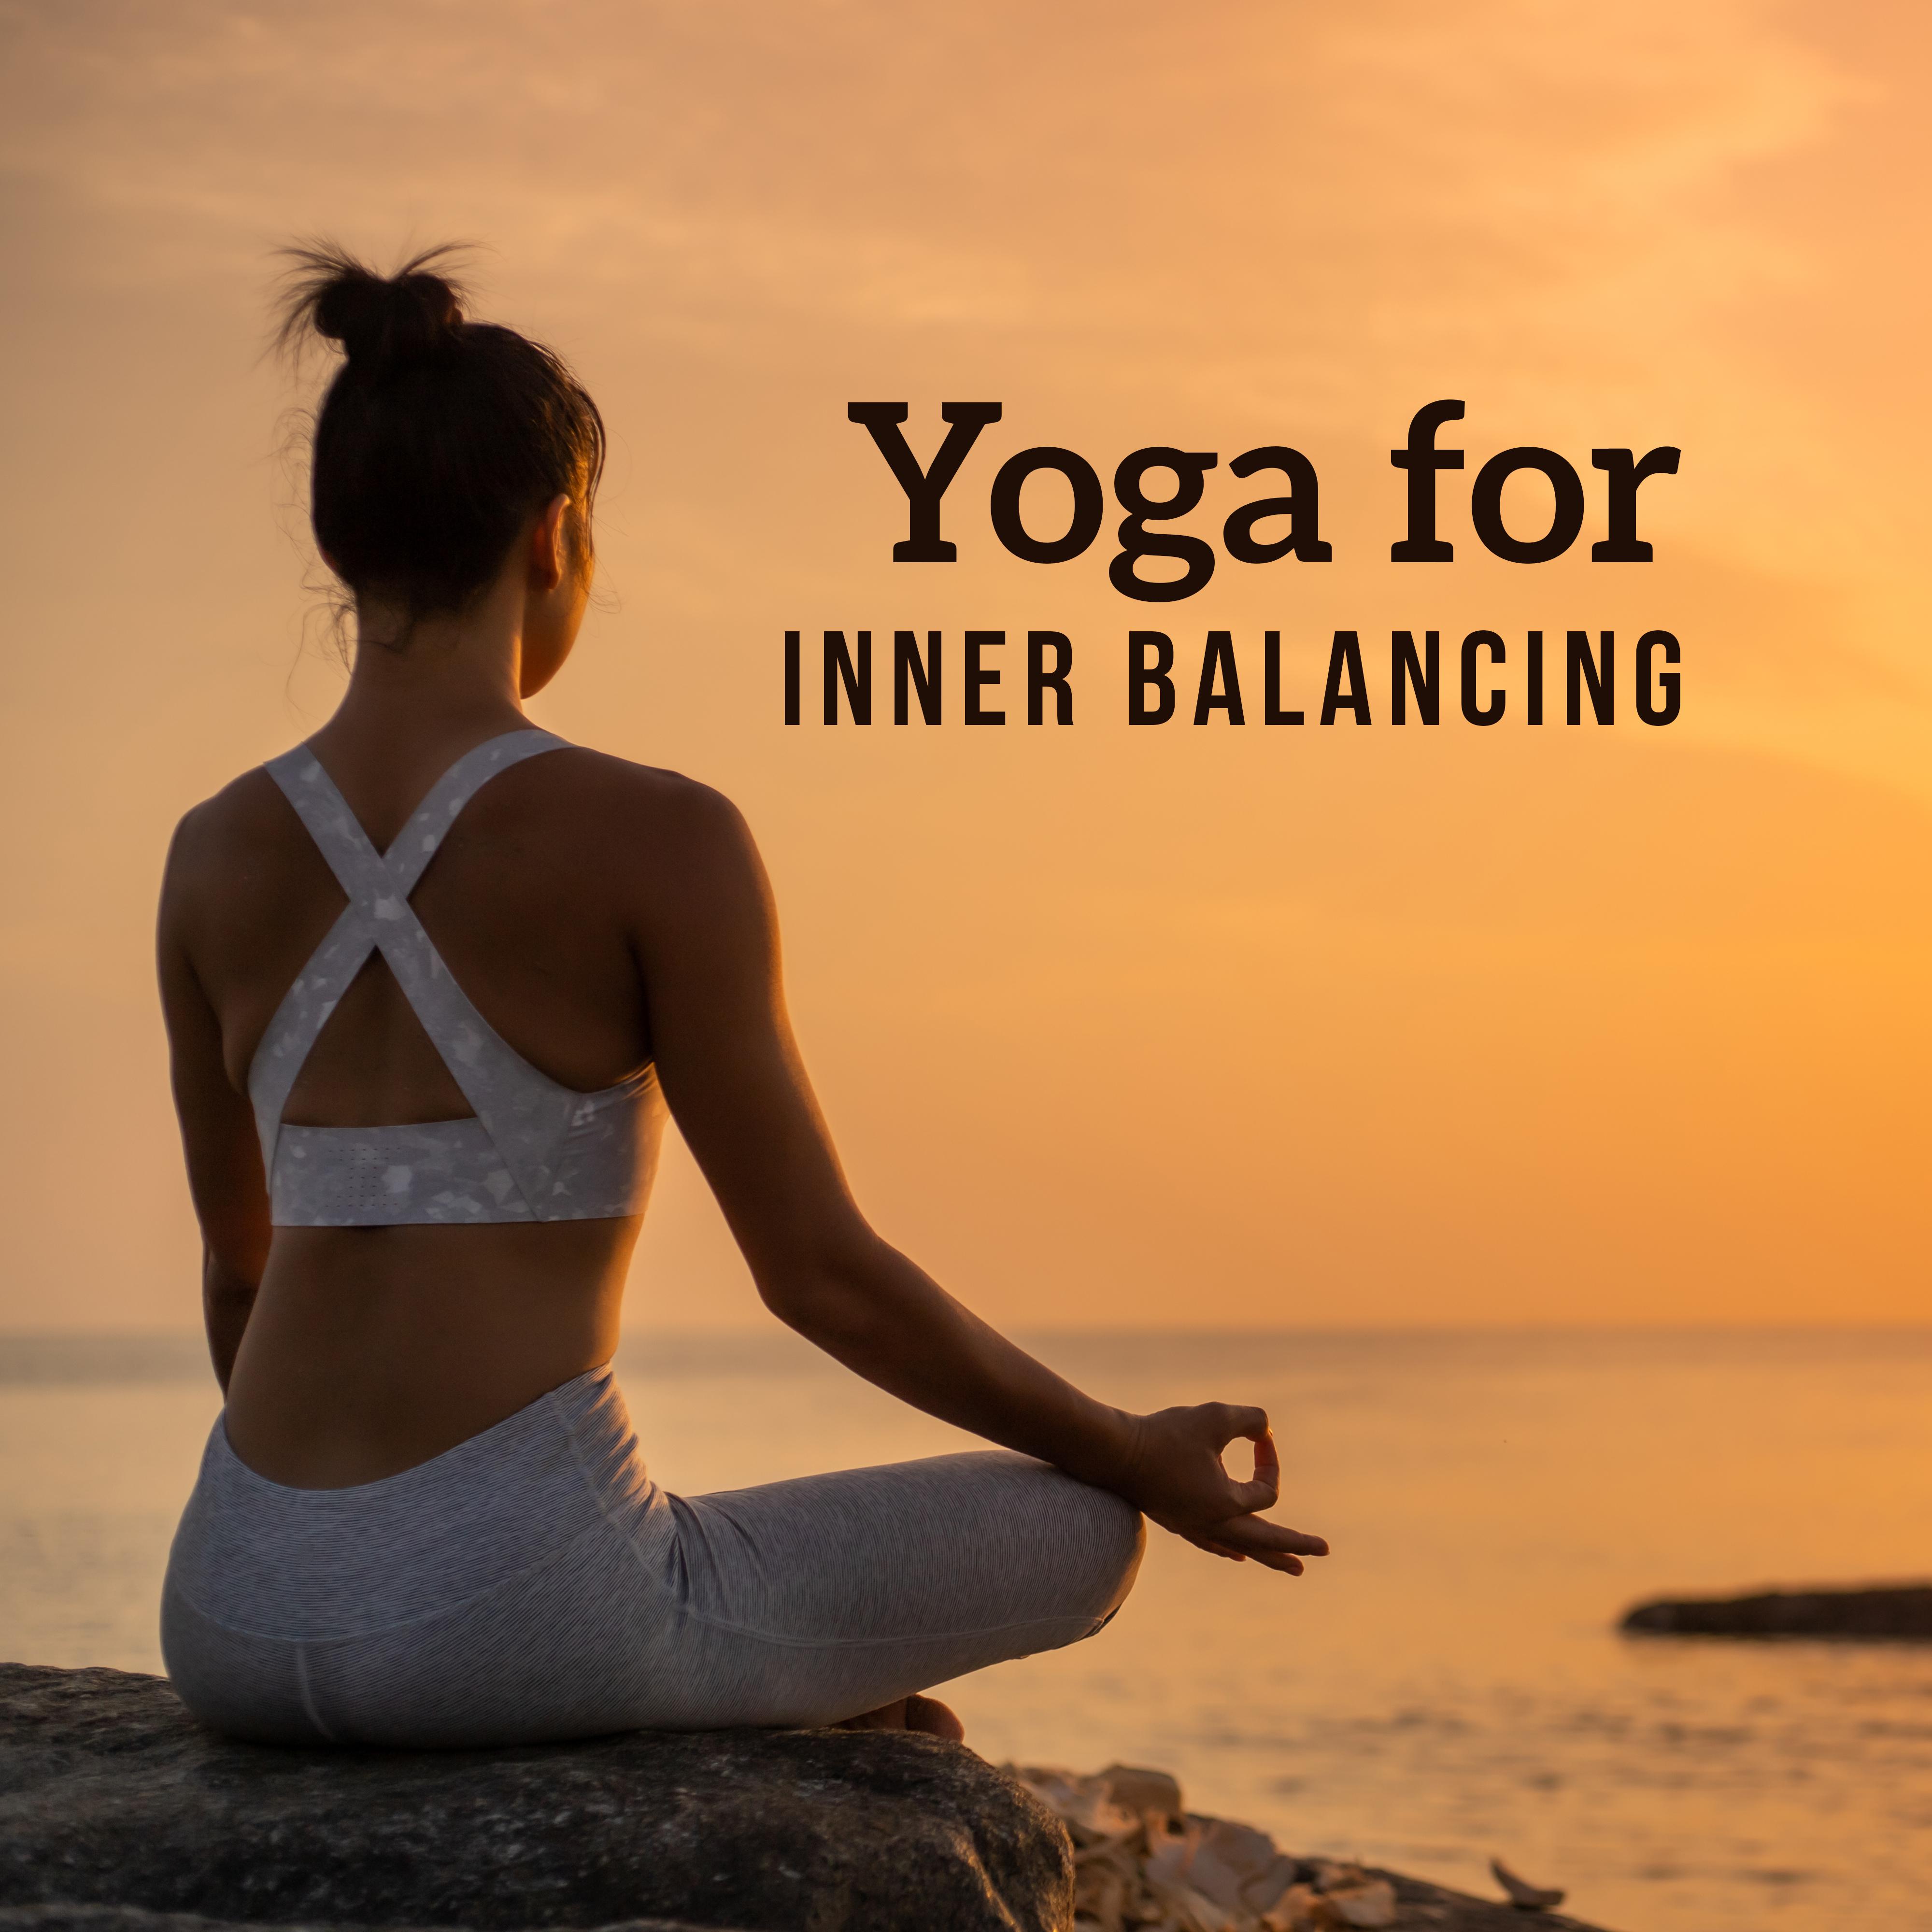 Yoga for Inner Balancing: 2019 New Age Ambient Deep Music for Best Meditation & Relaxation Experience, Find Your Inner Harmony, Relax Your Body & Mind, Vital Energy Increase